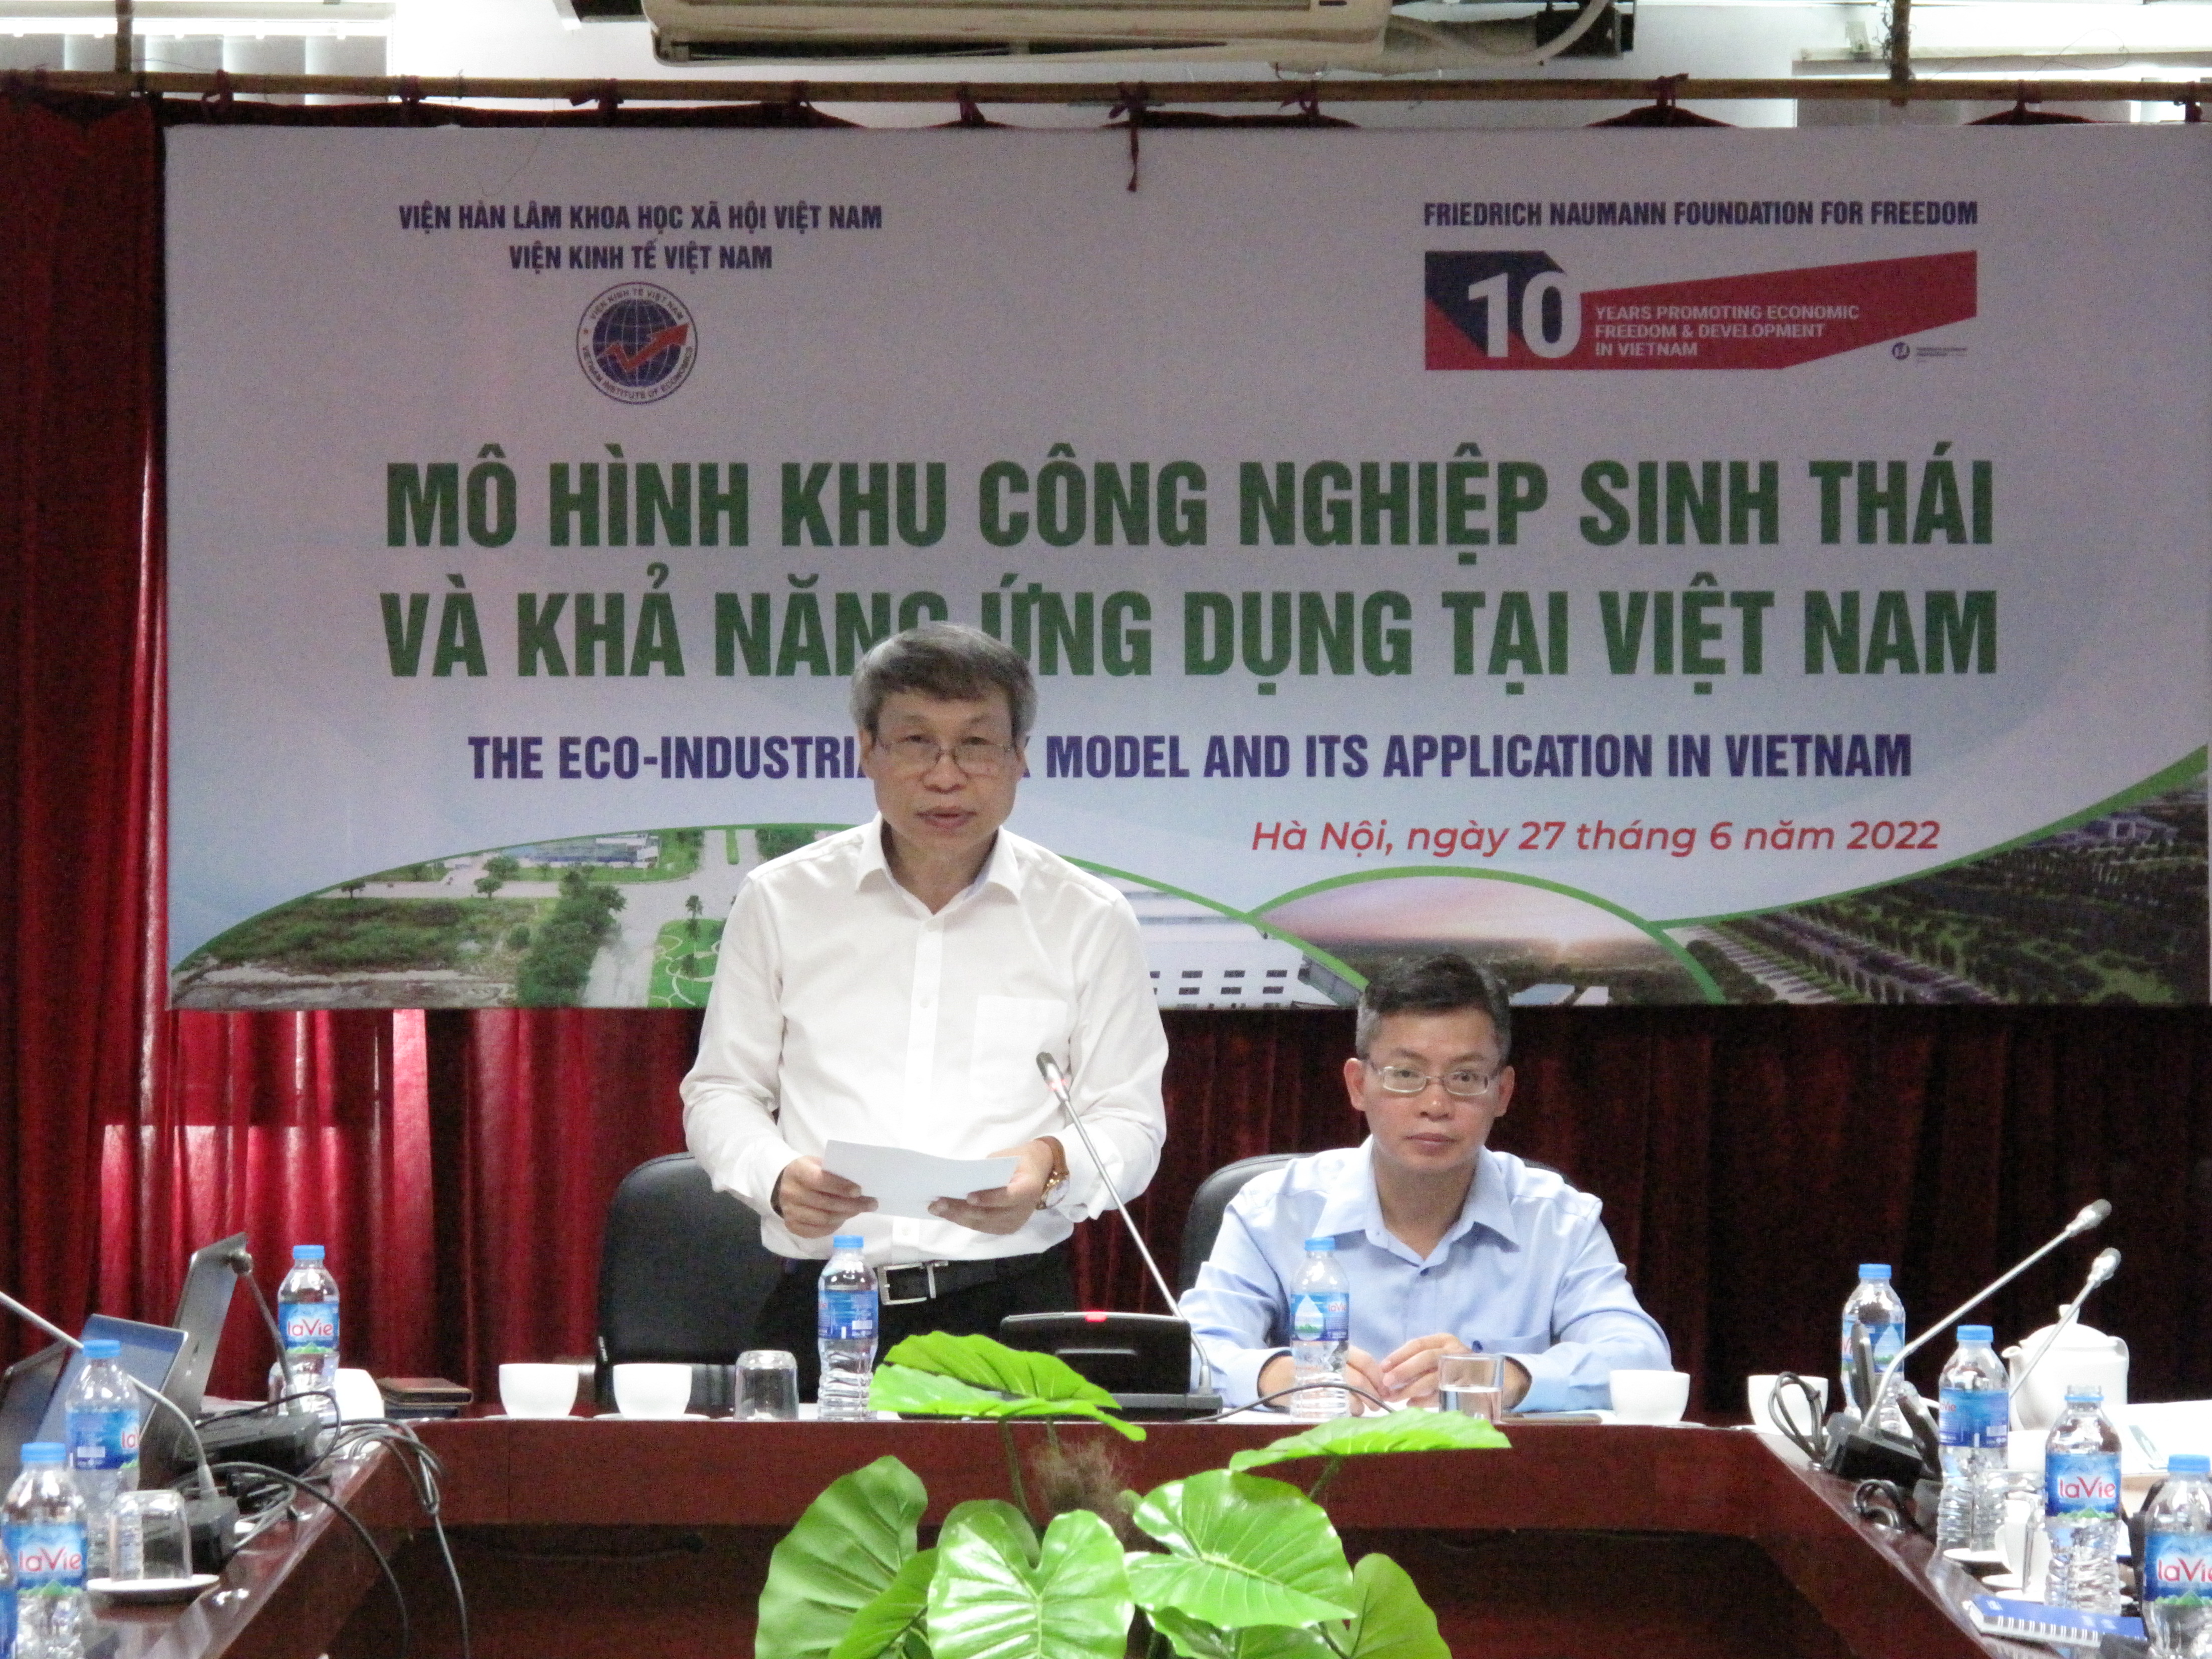 Assoc.Prof.Dr. Bui Quang Tuan, Director of the Vietnam Institute of Economics and Dr. Pham Hung Tien, Deputy Country Director of the Vietnam FNF Institute co-chaired the workshop